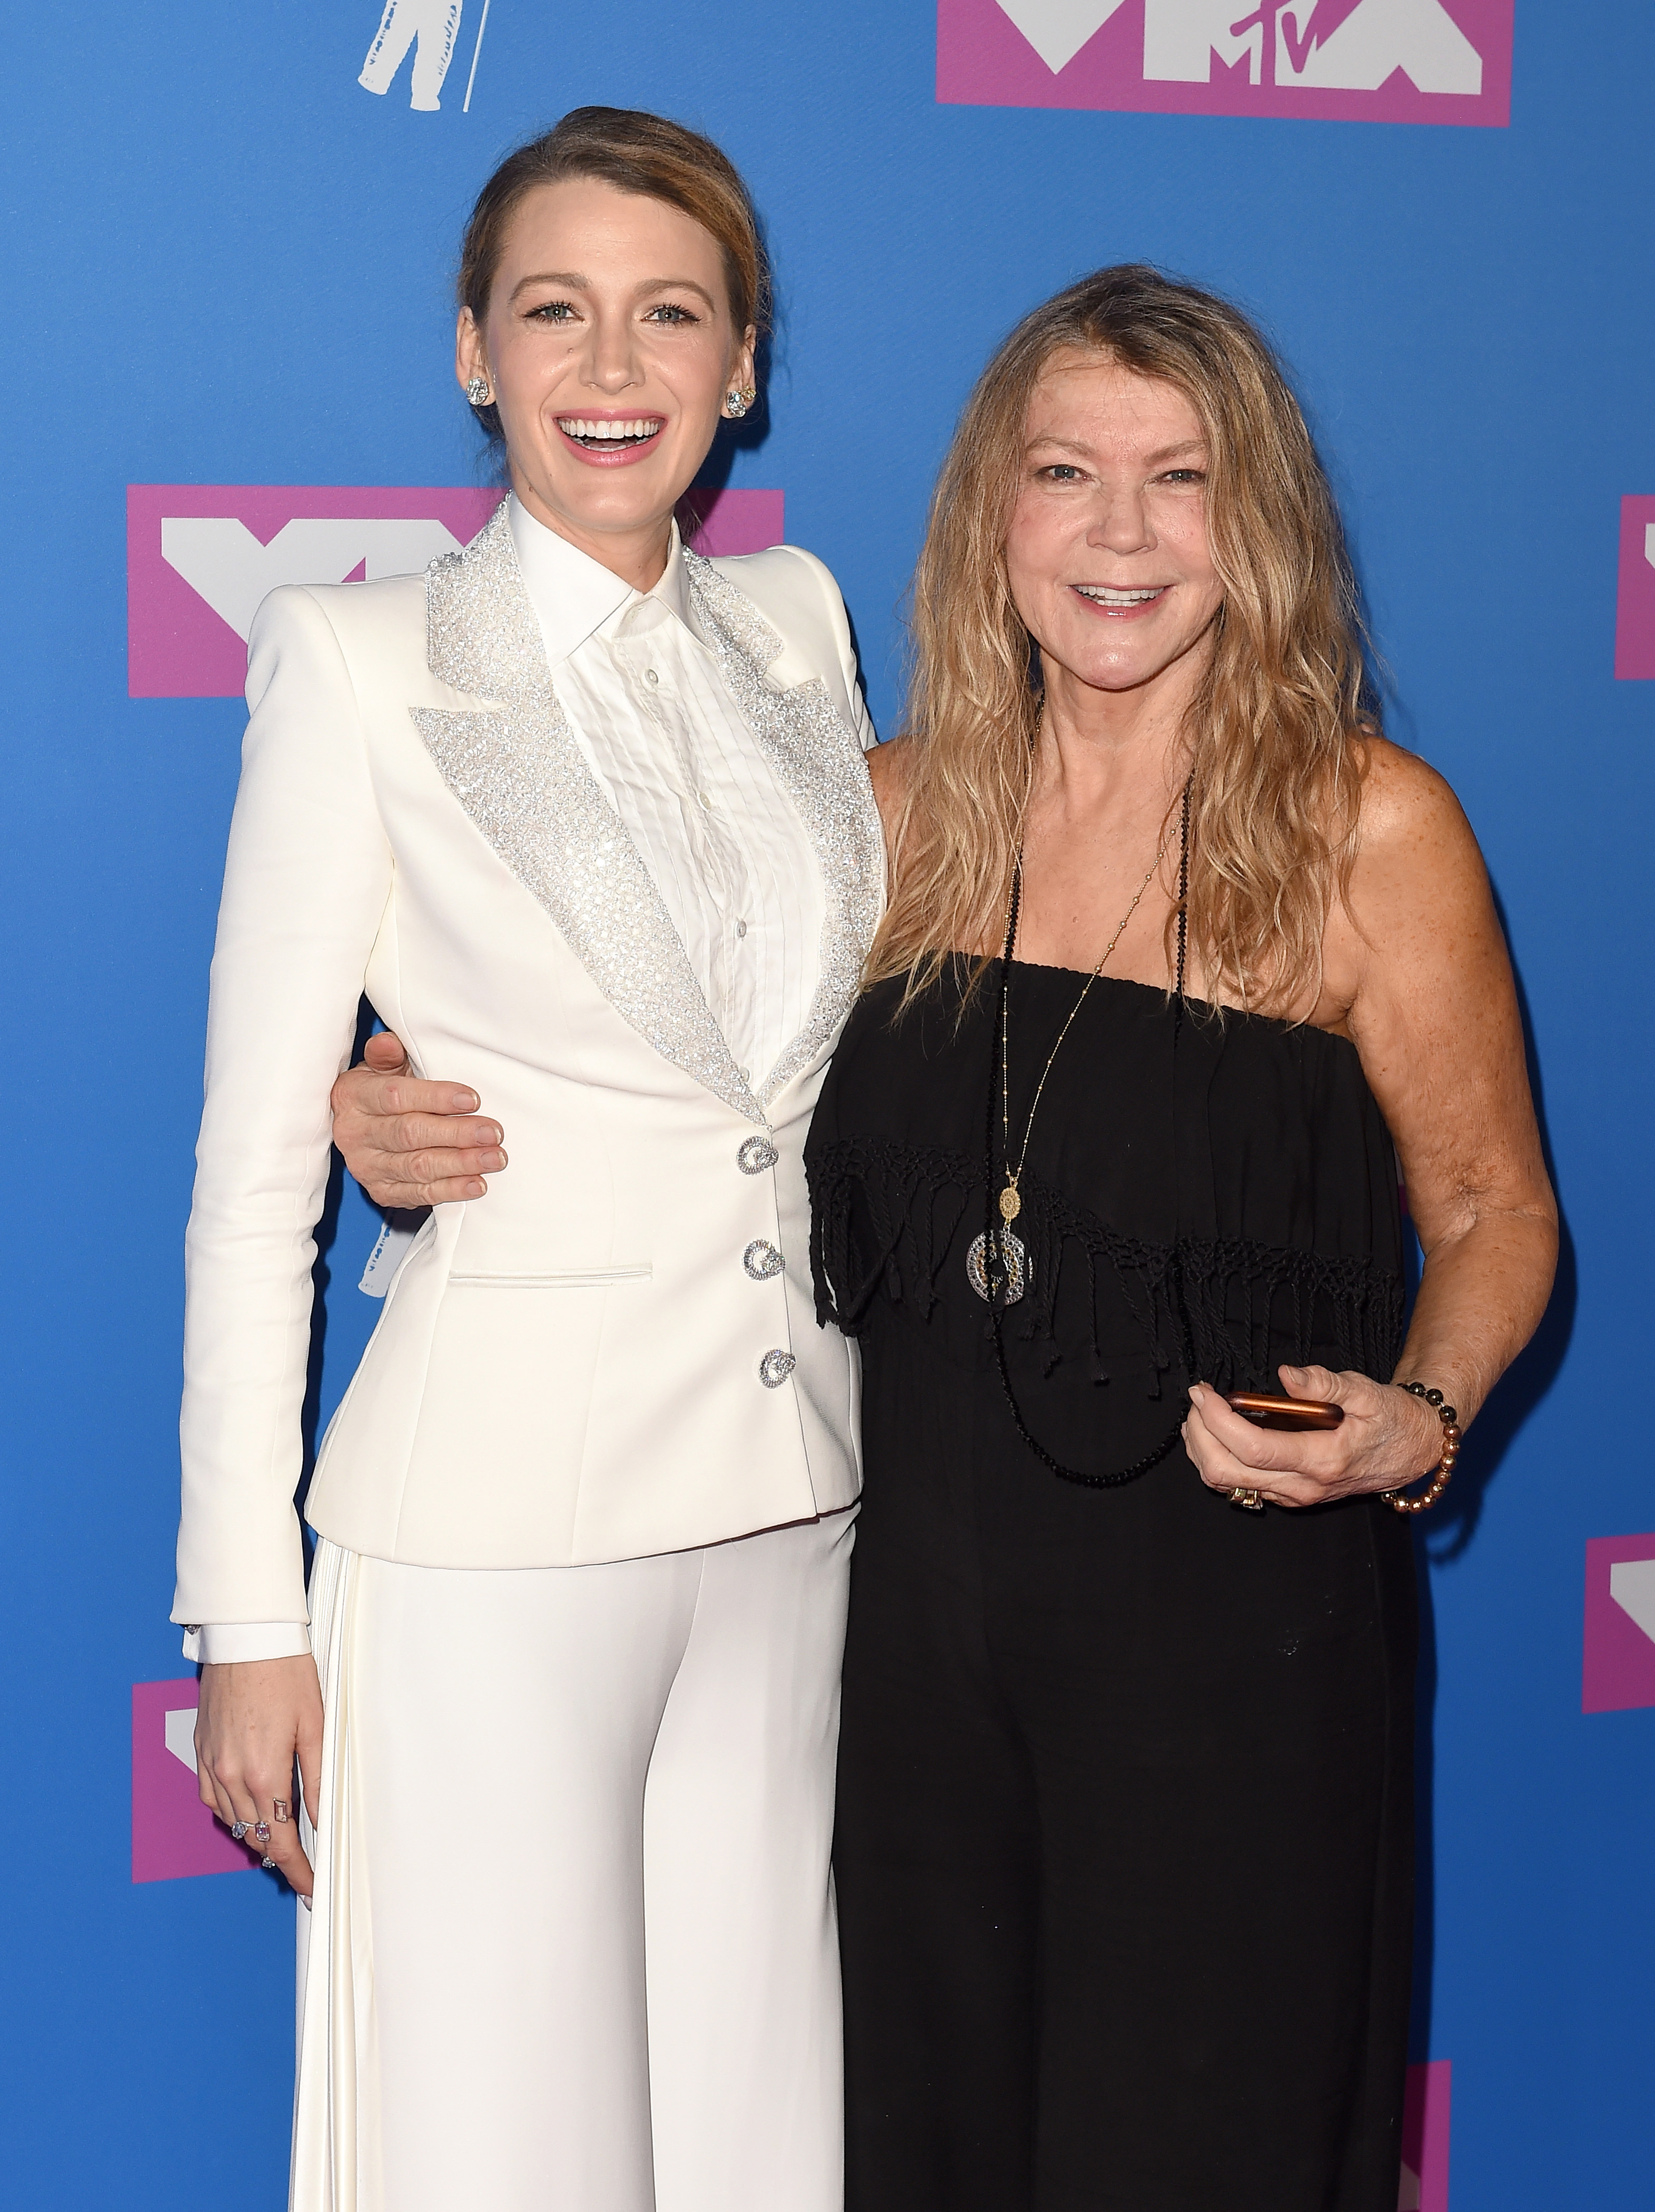 Blake Lively and Elaine Lively attend the MTV Video Music Awards in New York City, on August 20, 2018. | Source: Getty Images